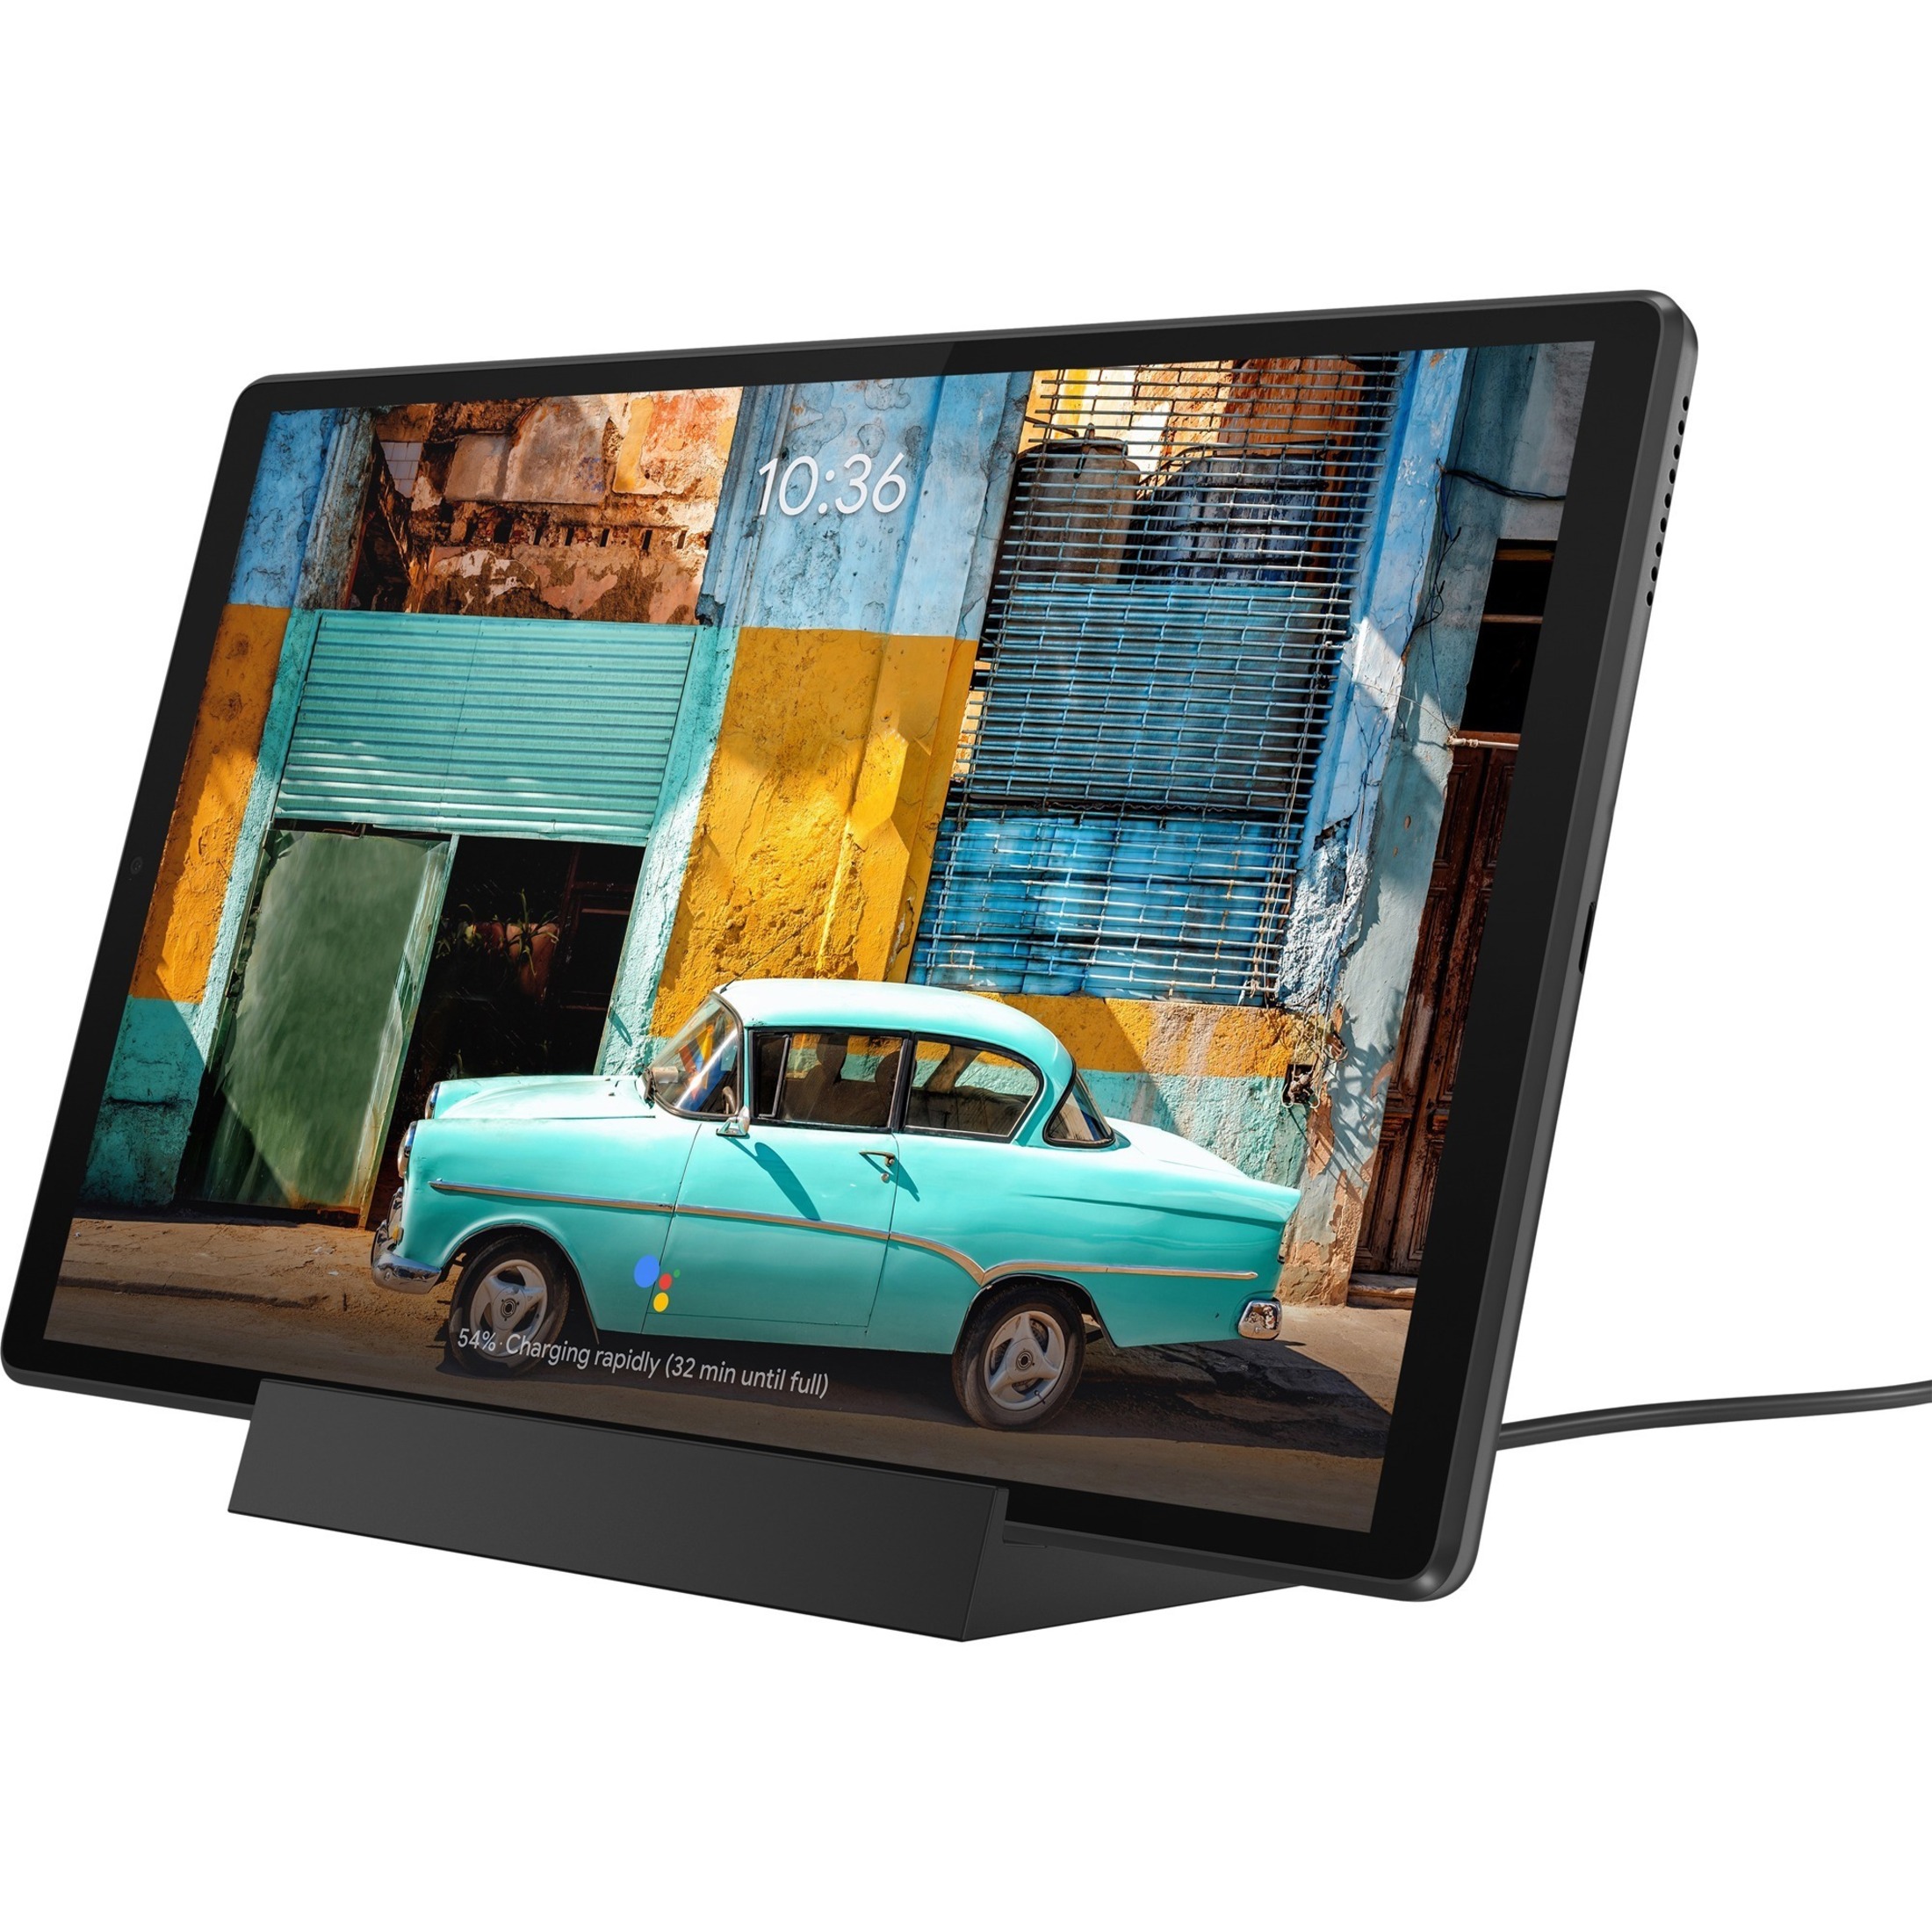 Lenovo Tab M10 10.3" Tablet - MediaTek Helio P22T - 4GB - 64GB FHD Plus with the Smart Charging Station - Android 9.0 (Pie) - image 1 of 33